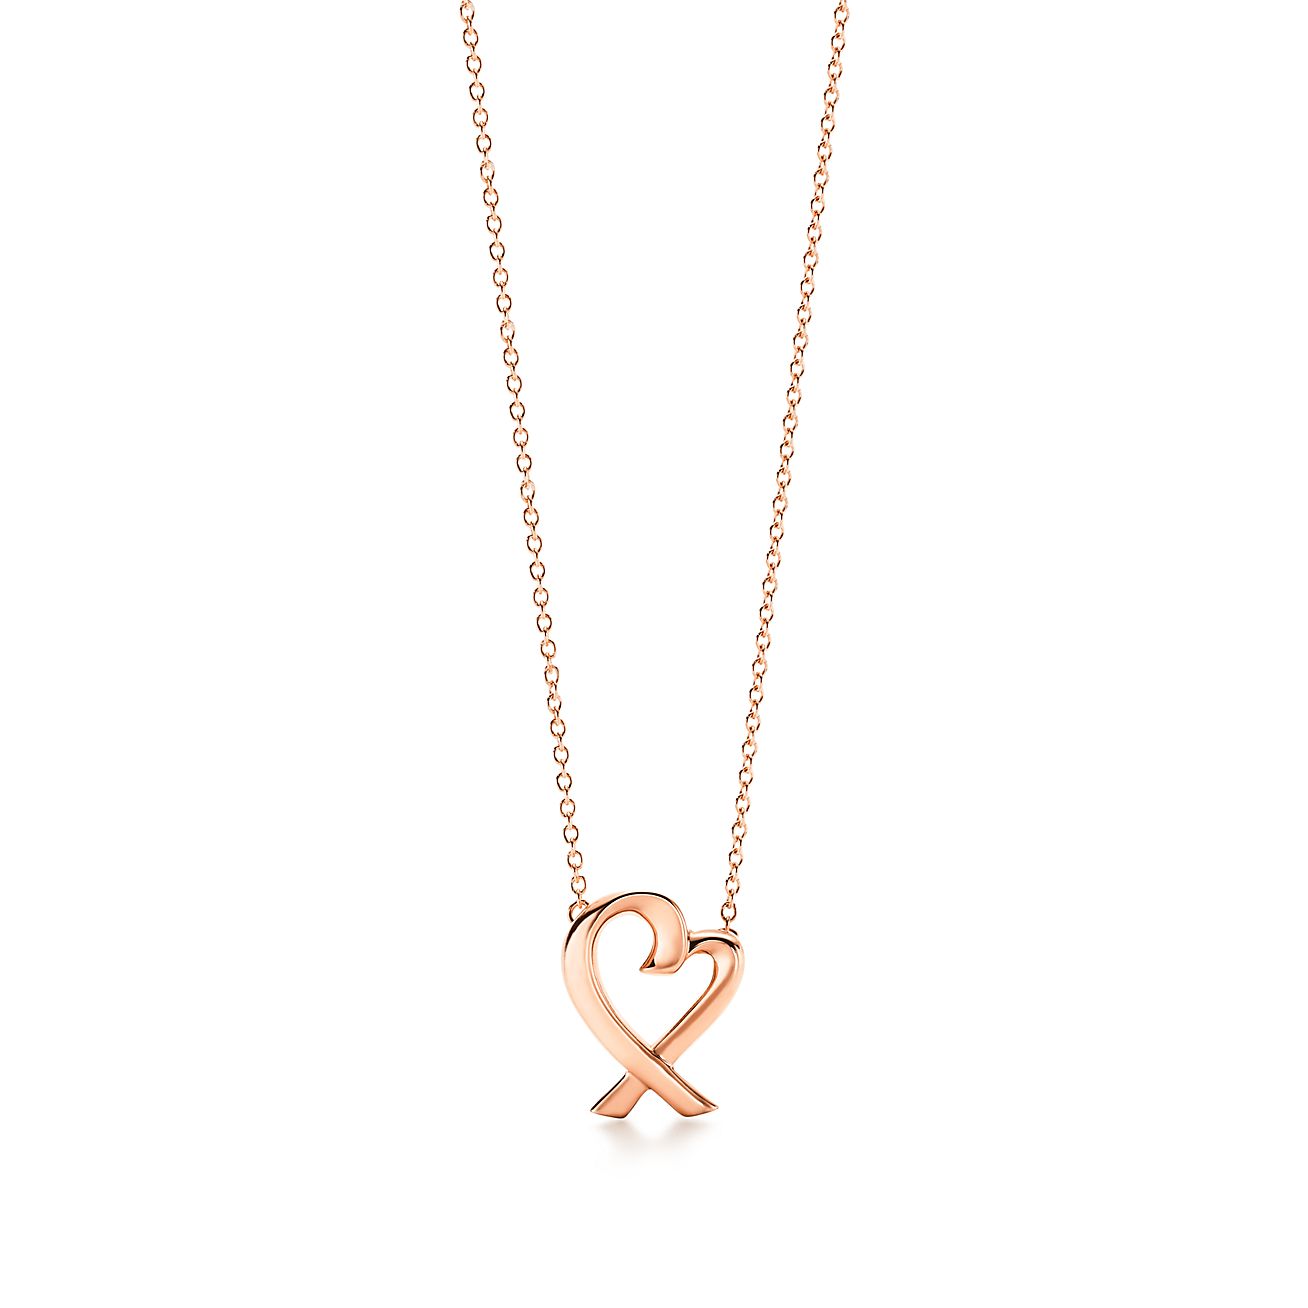 Pendentif Loving Heart Paloma Picasso en or rose 18 carats Small Tiffany & Co.